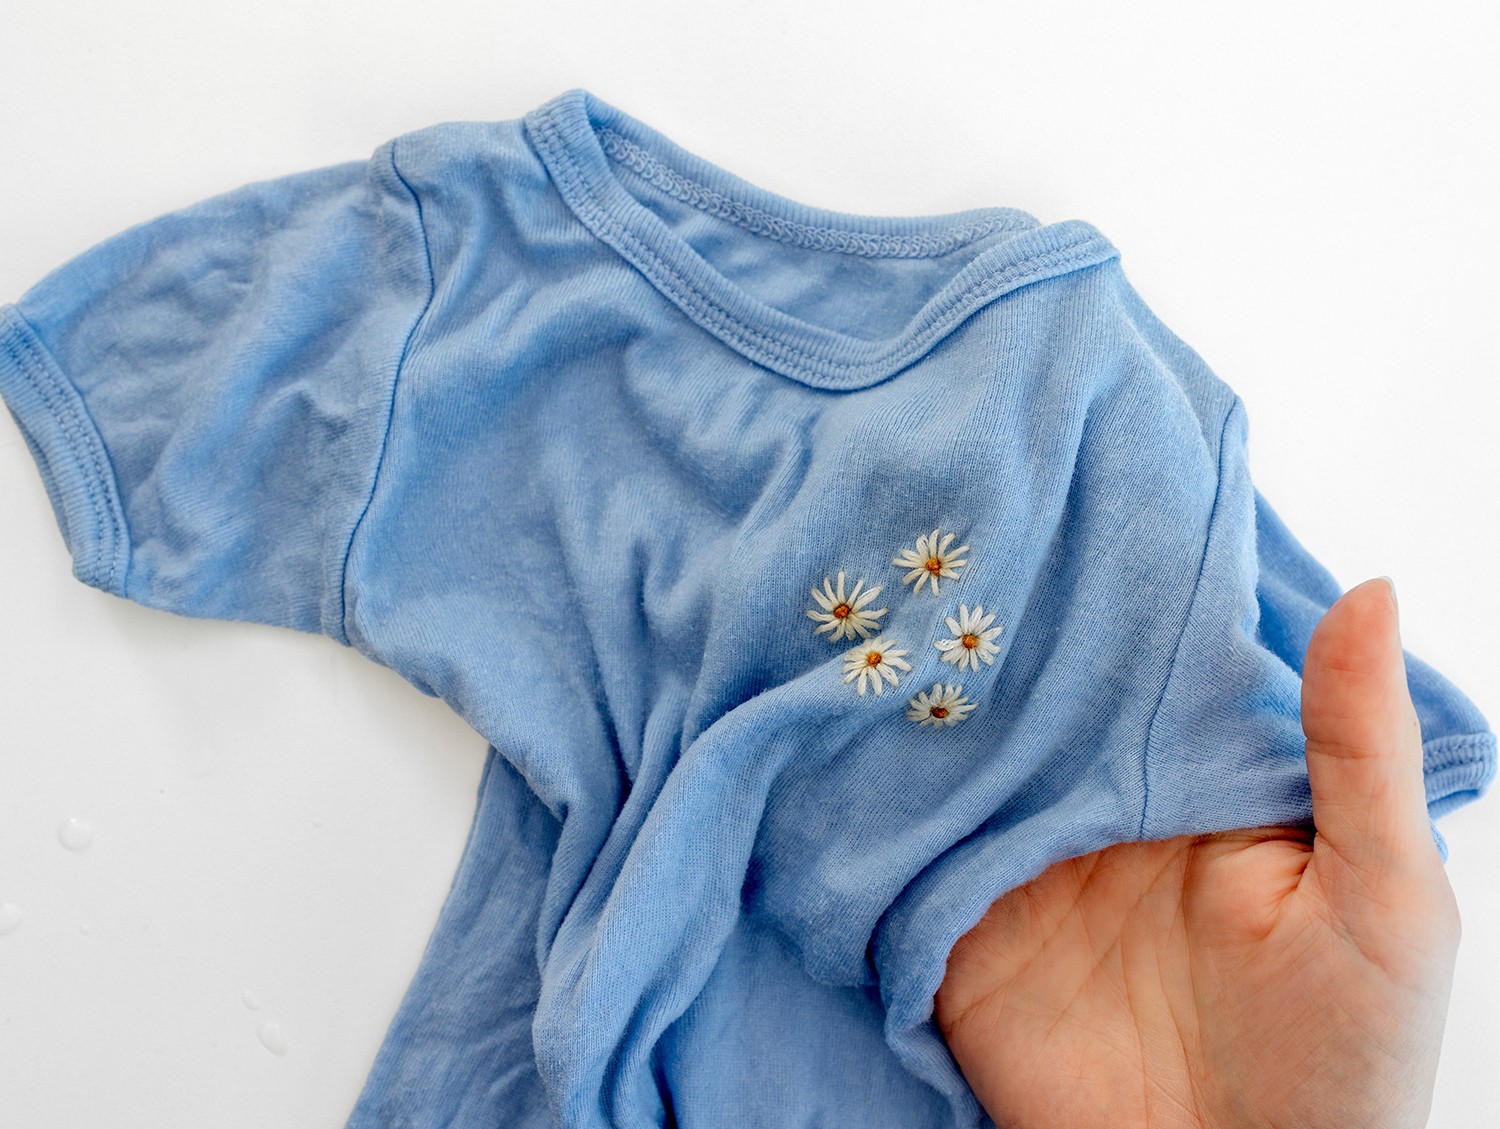 A hand holds a shirt up showing the embroidered daisy design.